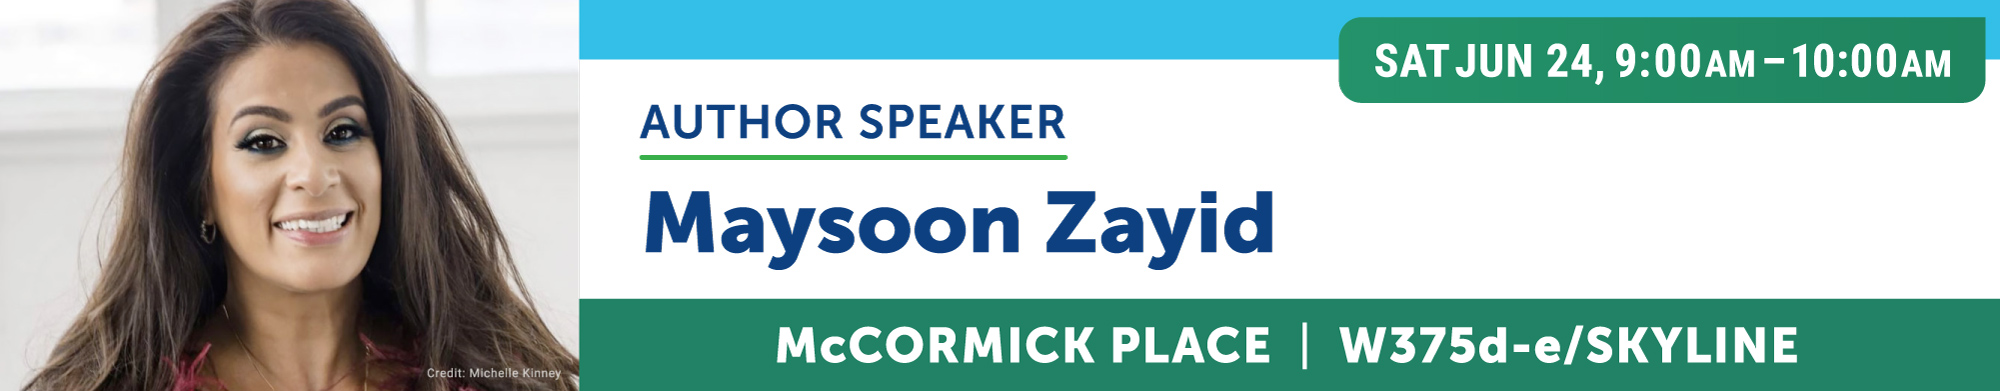 Maysoon Zayid speaking on Saturday at 9am in the Skyline ballroom